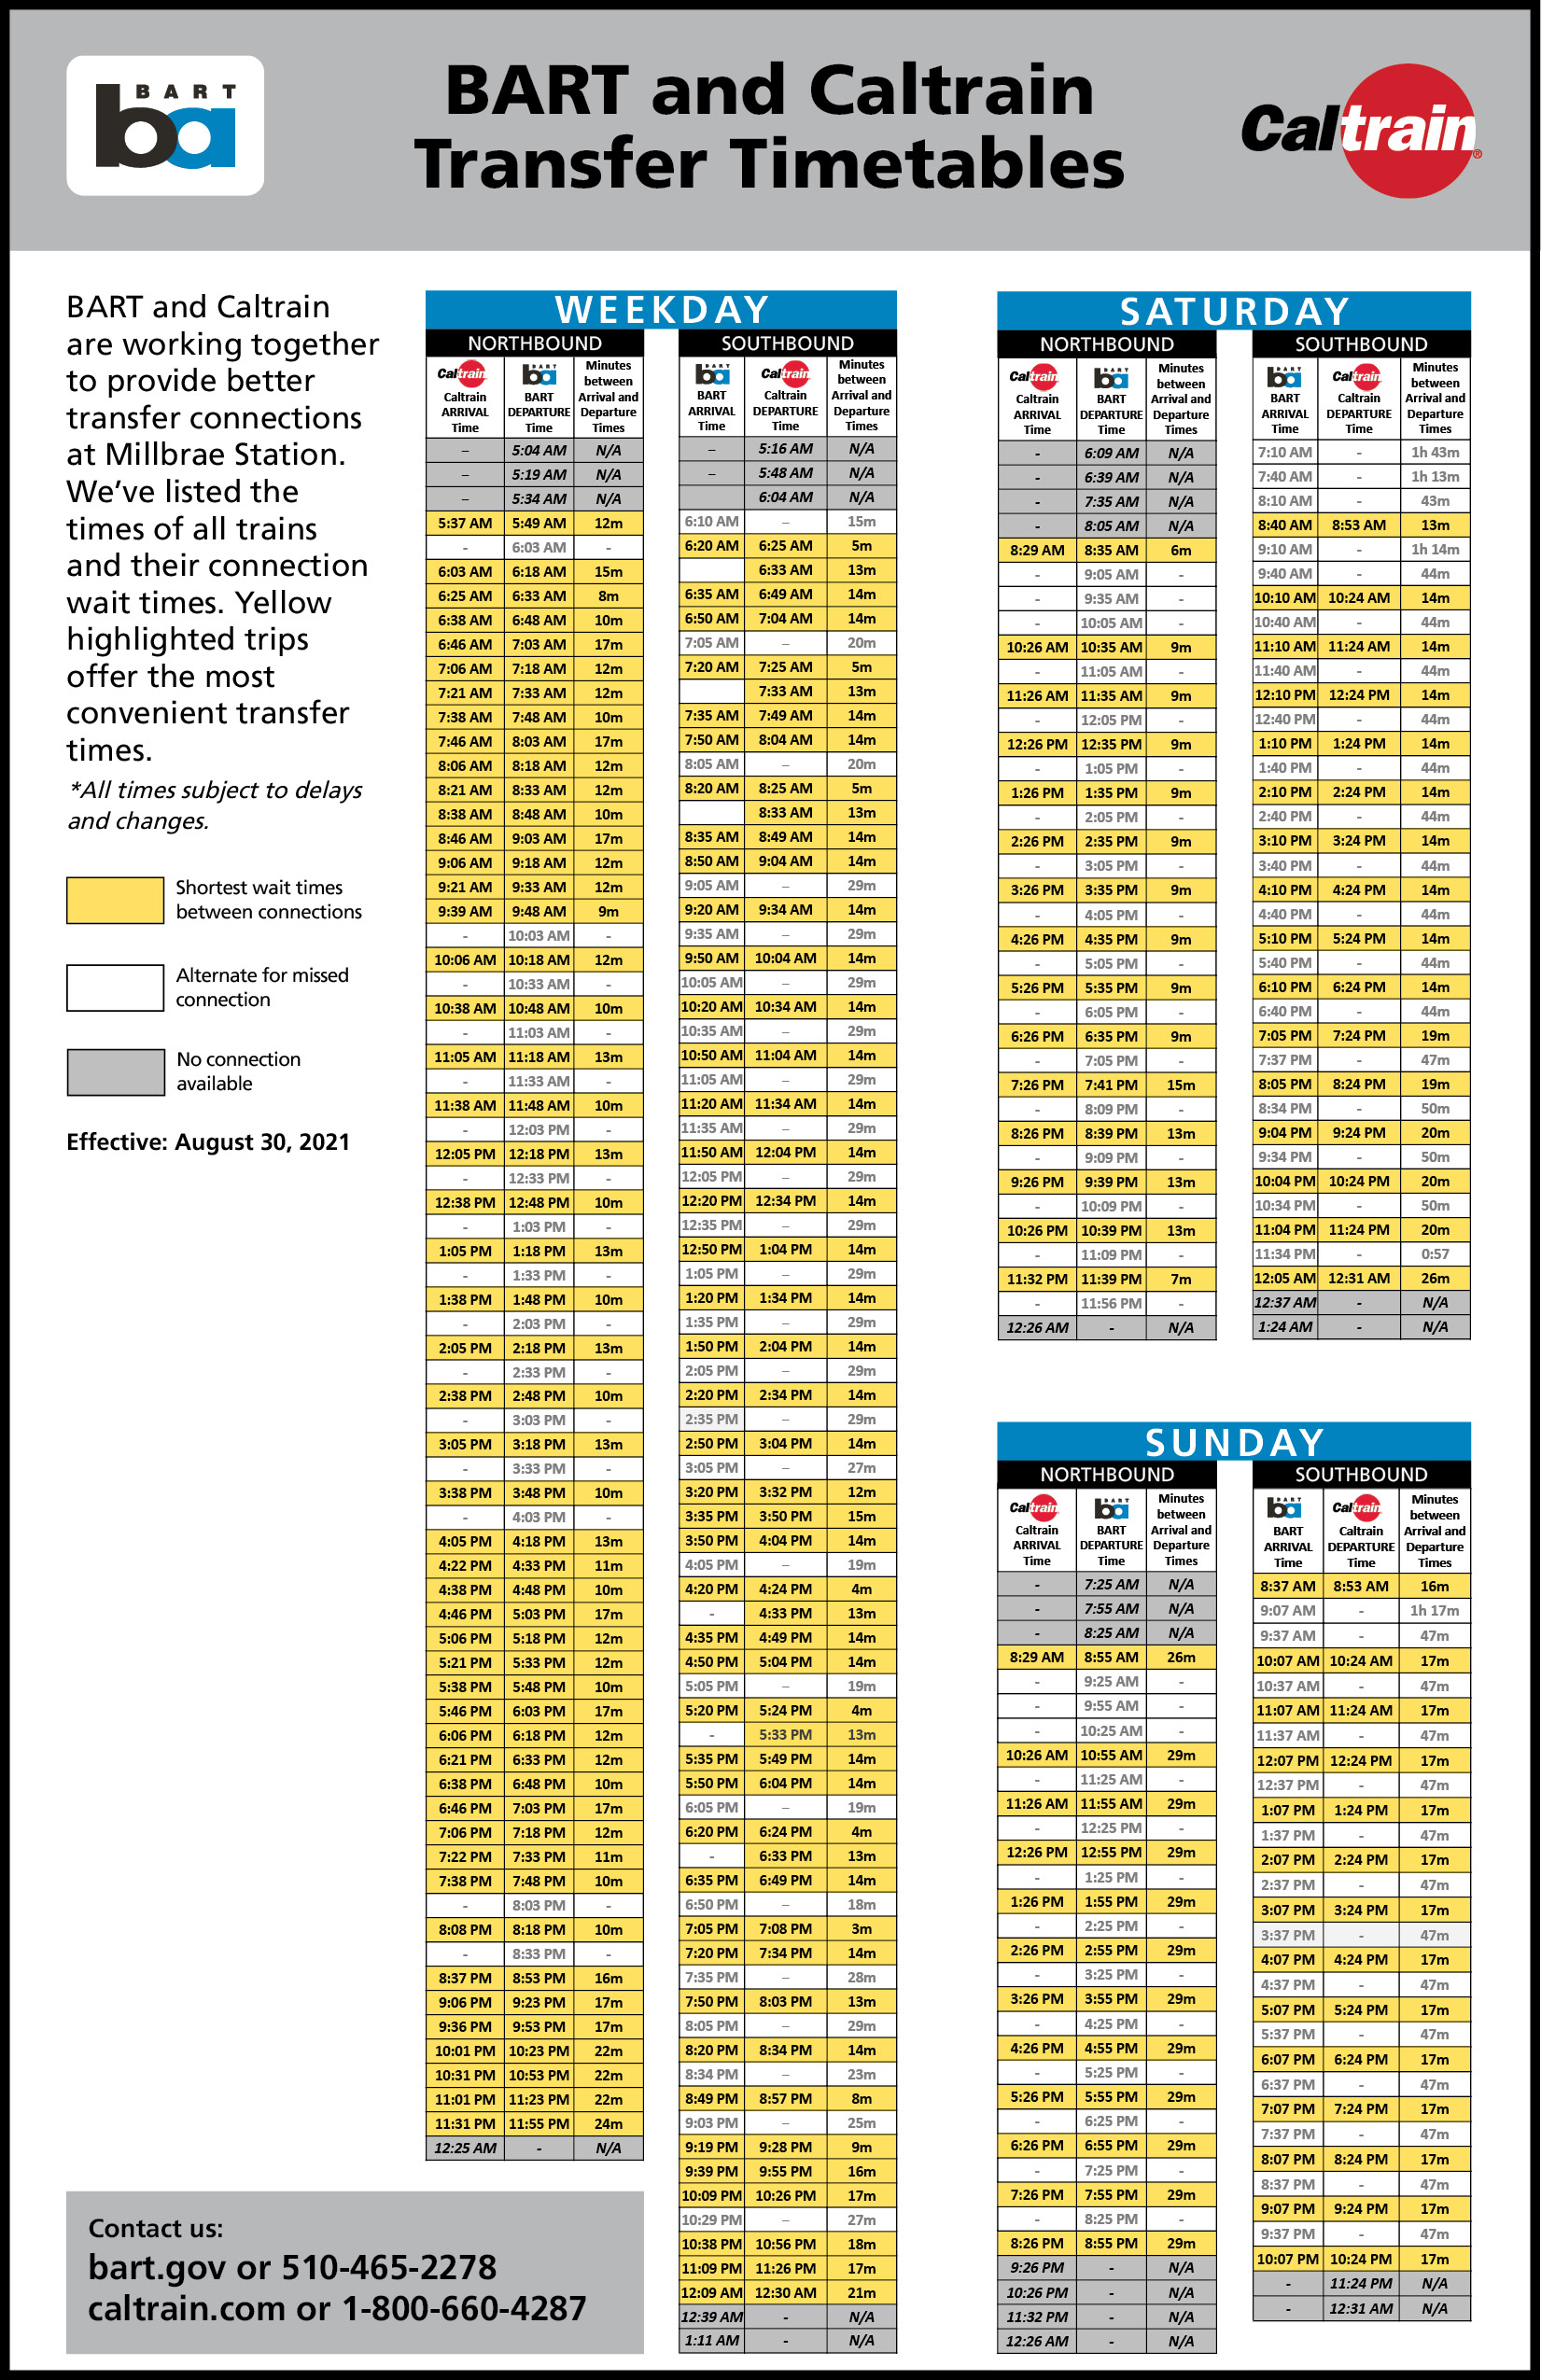 BART and Caltrain transfer times. PDF accessible version is included on bart.gov